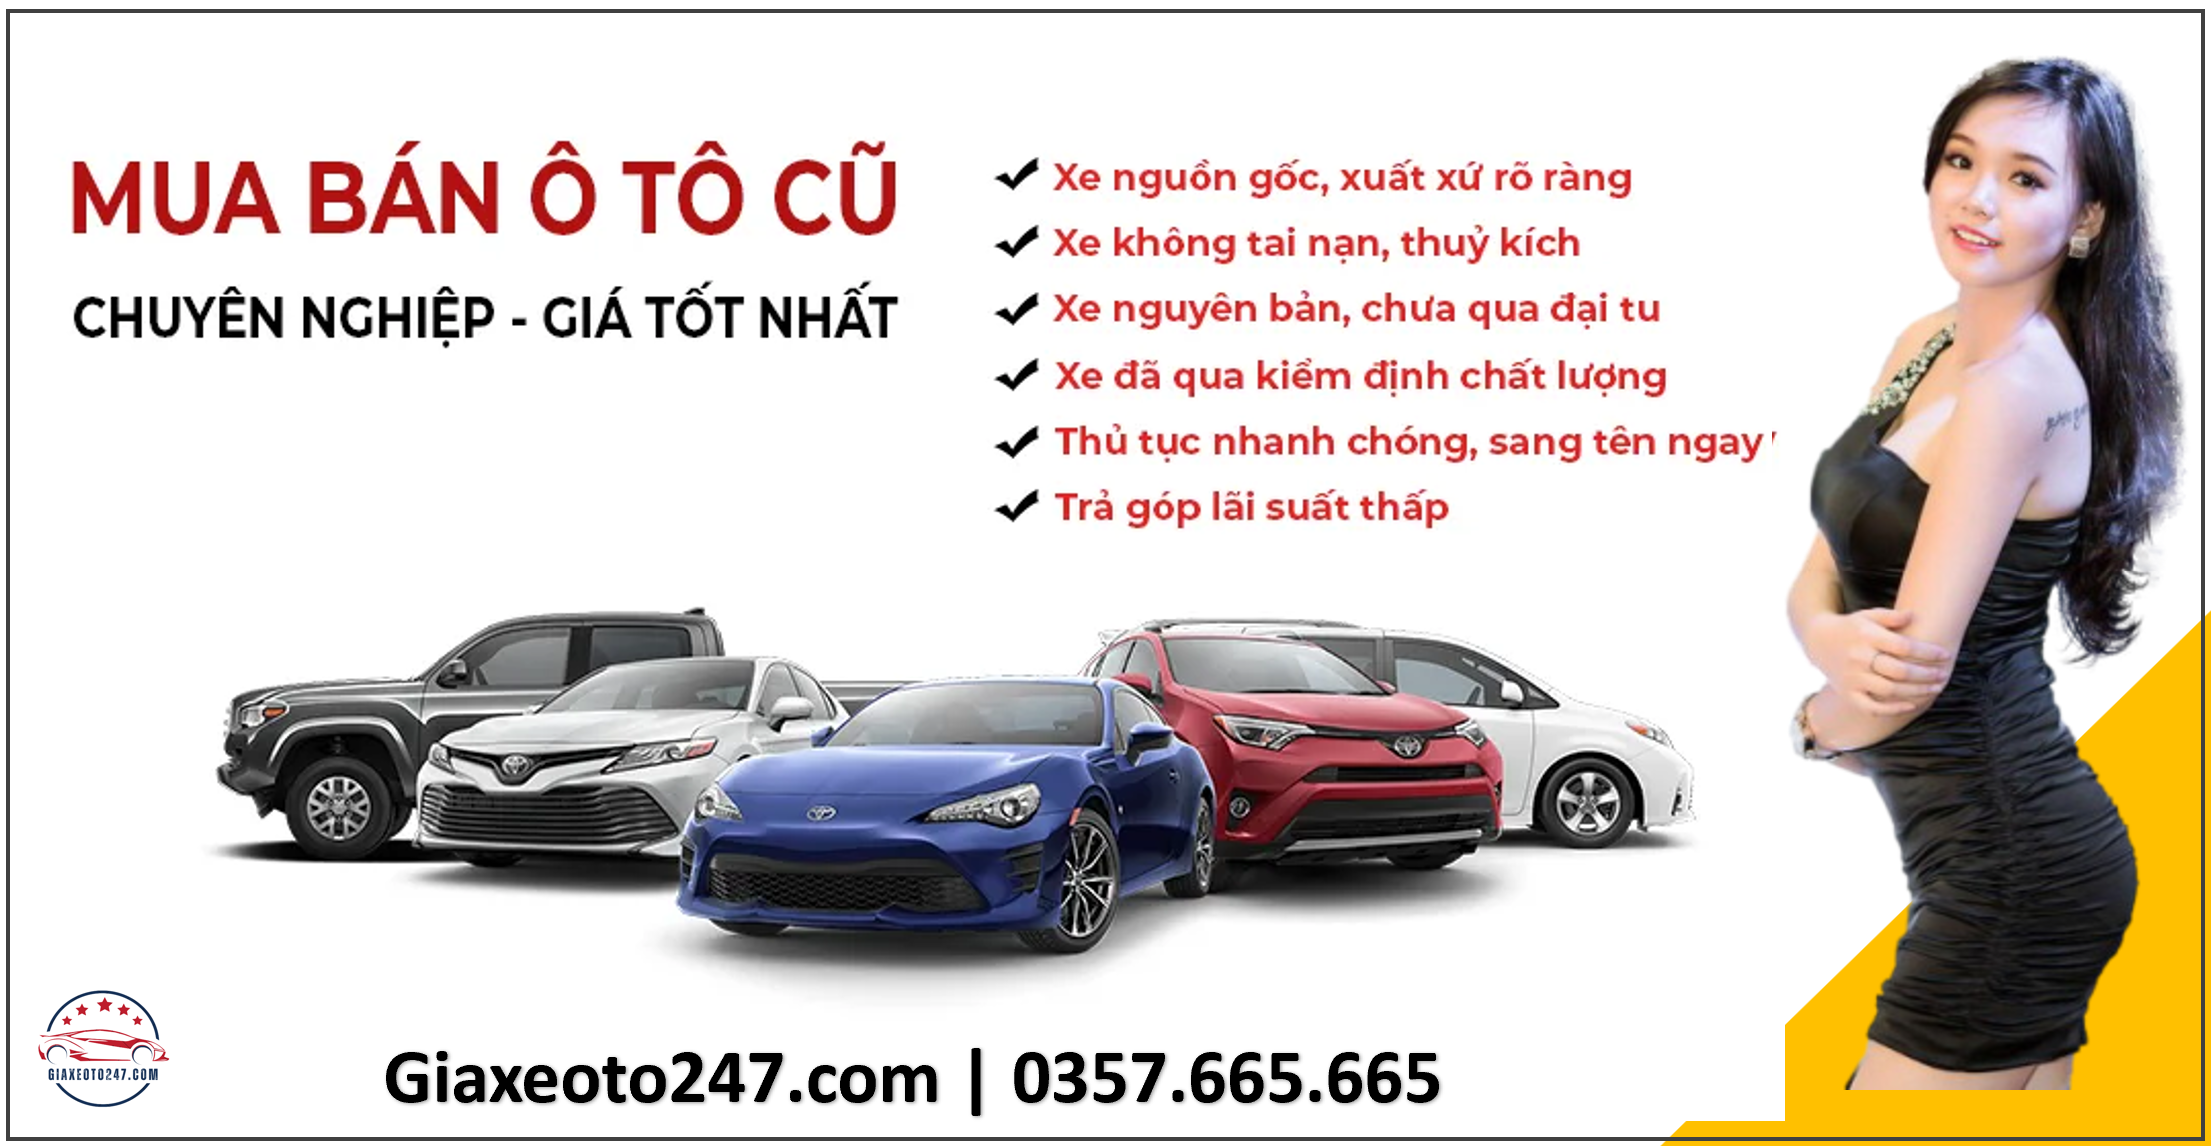 Dich vu thu mua o to cu da qua su dung mua ban toan quoc 3 - Giá xe Spark Duo 2018